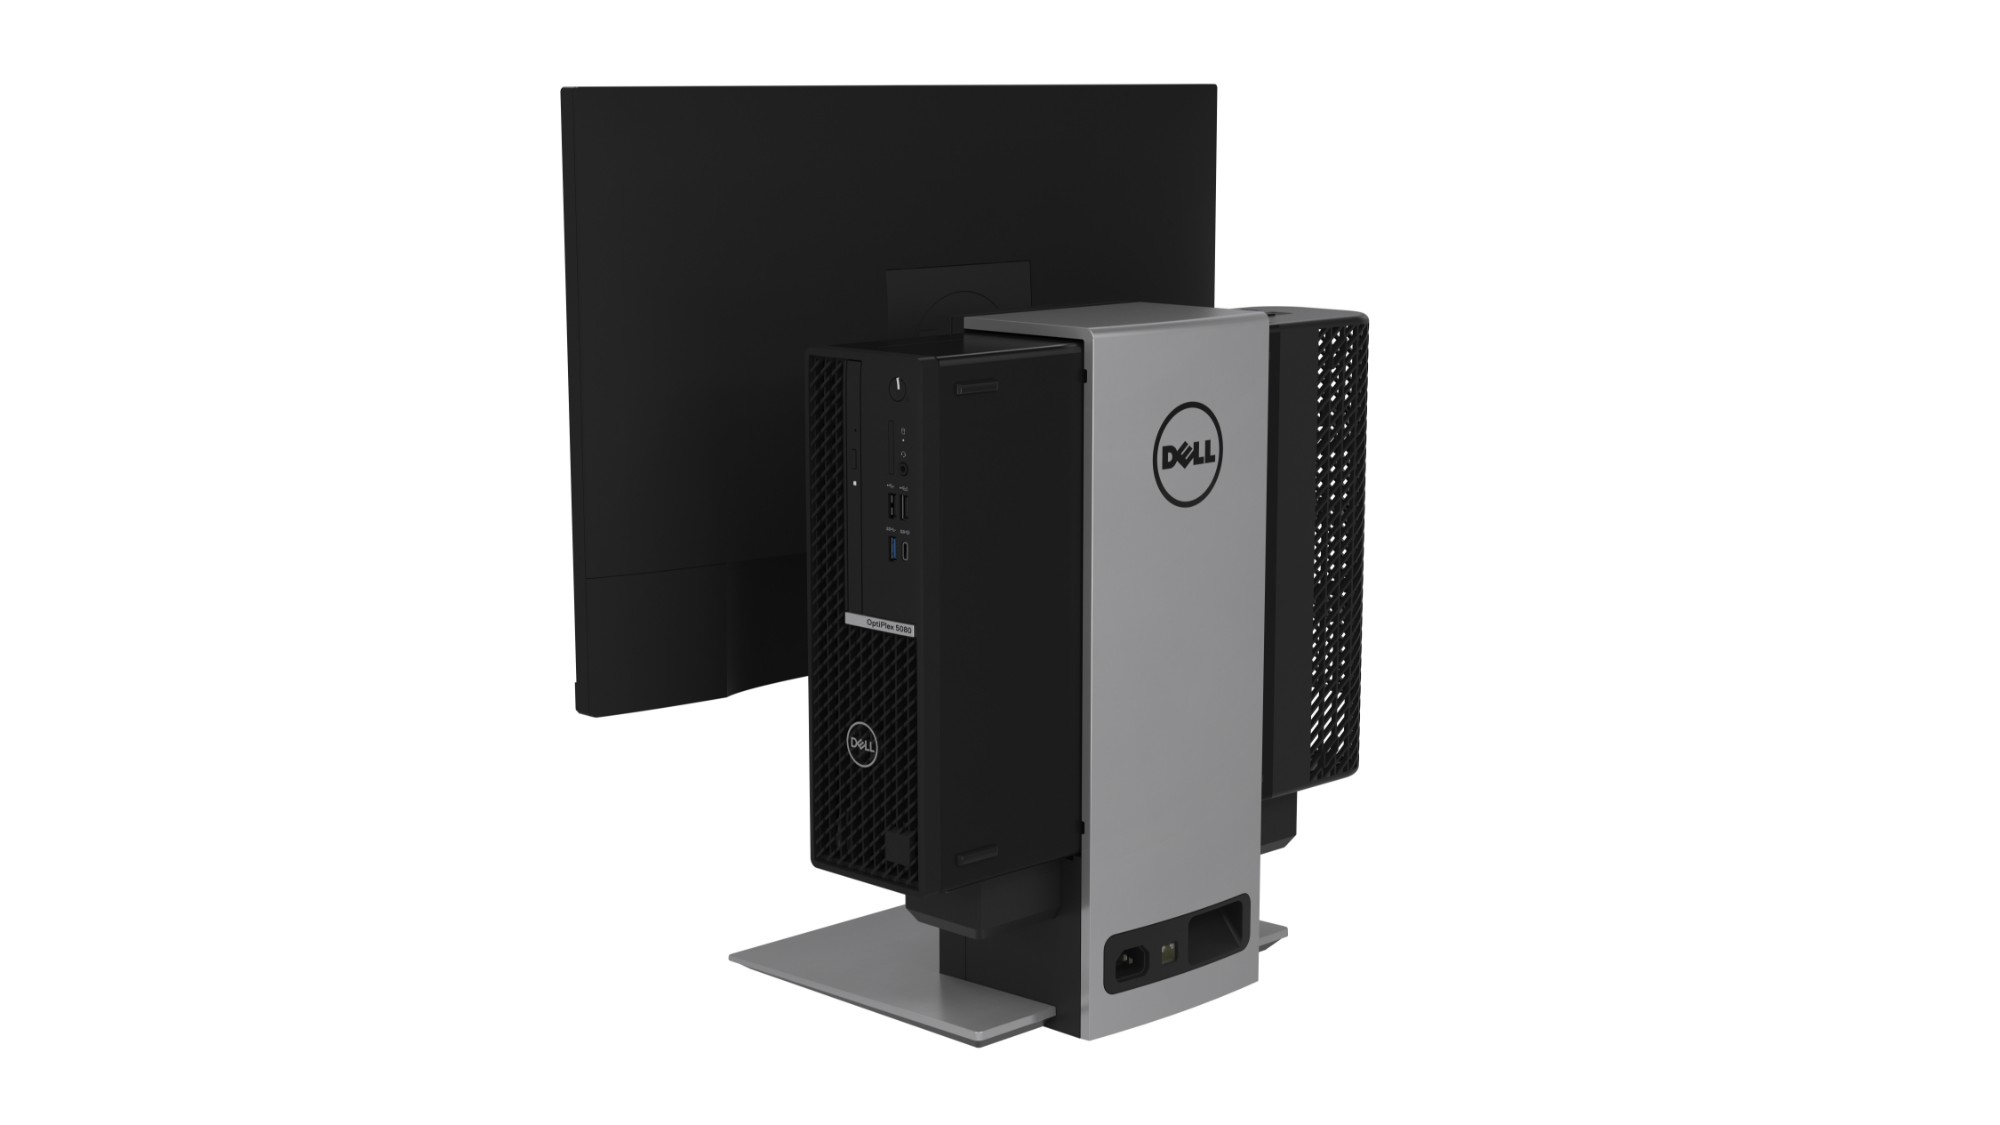 DELL Small Form Factor All-in-One Stand OSS21, 0 in distributor/wholesale  stock for resellers to sell - Stock In The Channel